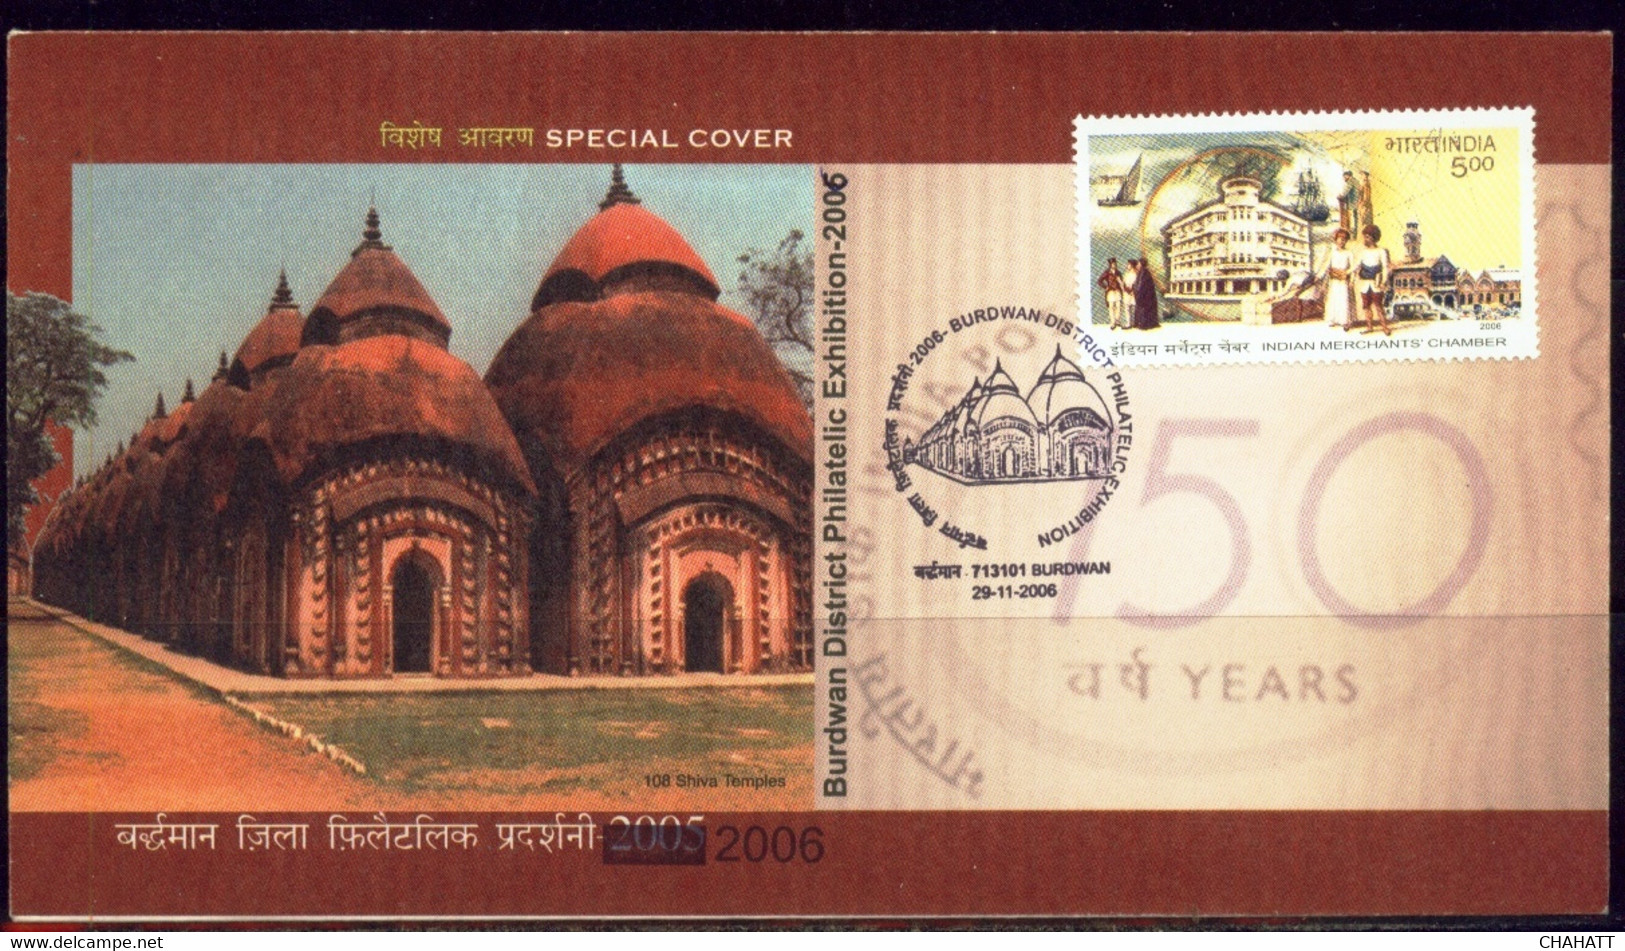 HINDUISM- LORD SHIVA- TERRACOTTA TEMPLE-BURDWAN-SPECIAL COVER- PICTORIAL CANCEL-USED-INDIA-2006-BX3-41 - Hinduism